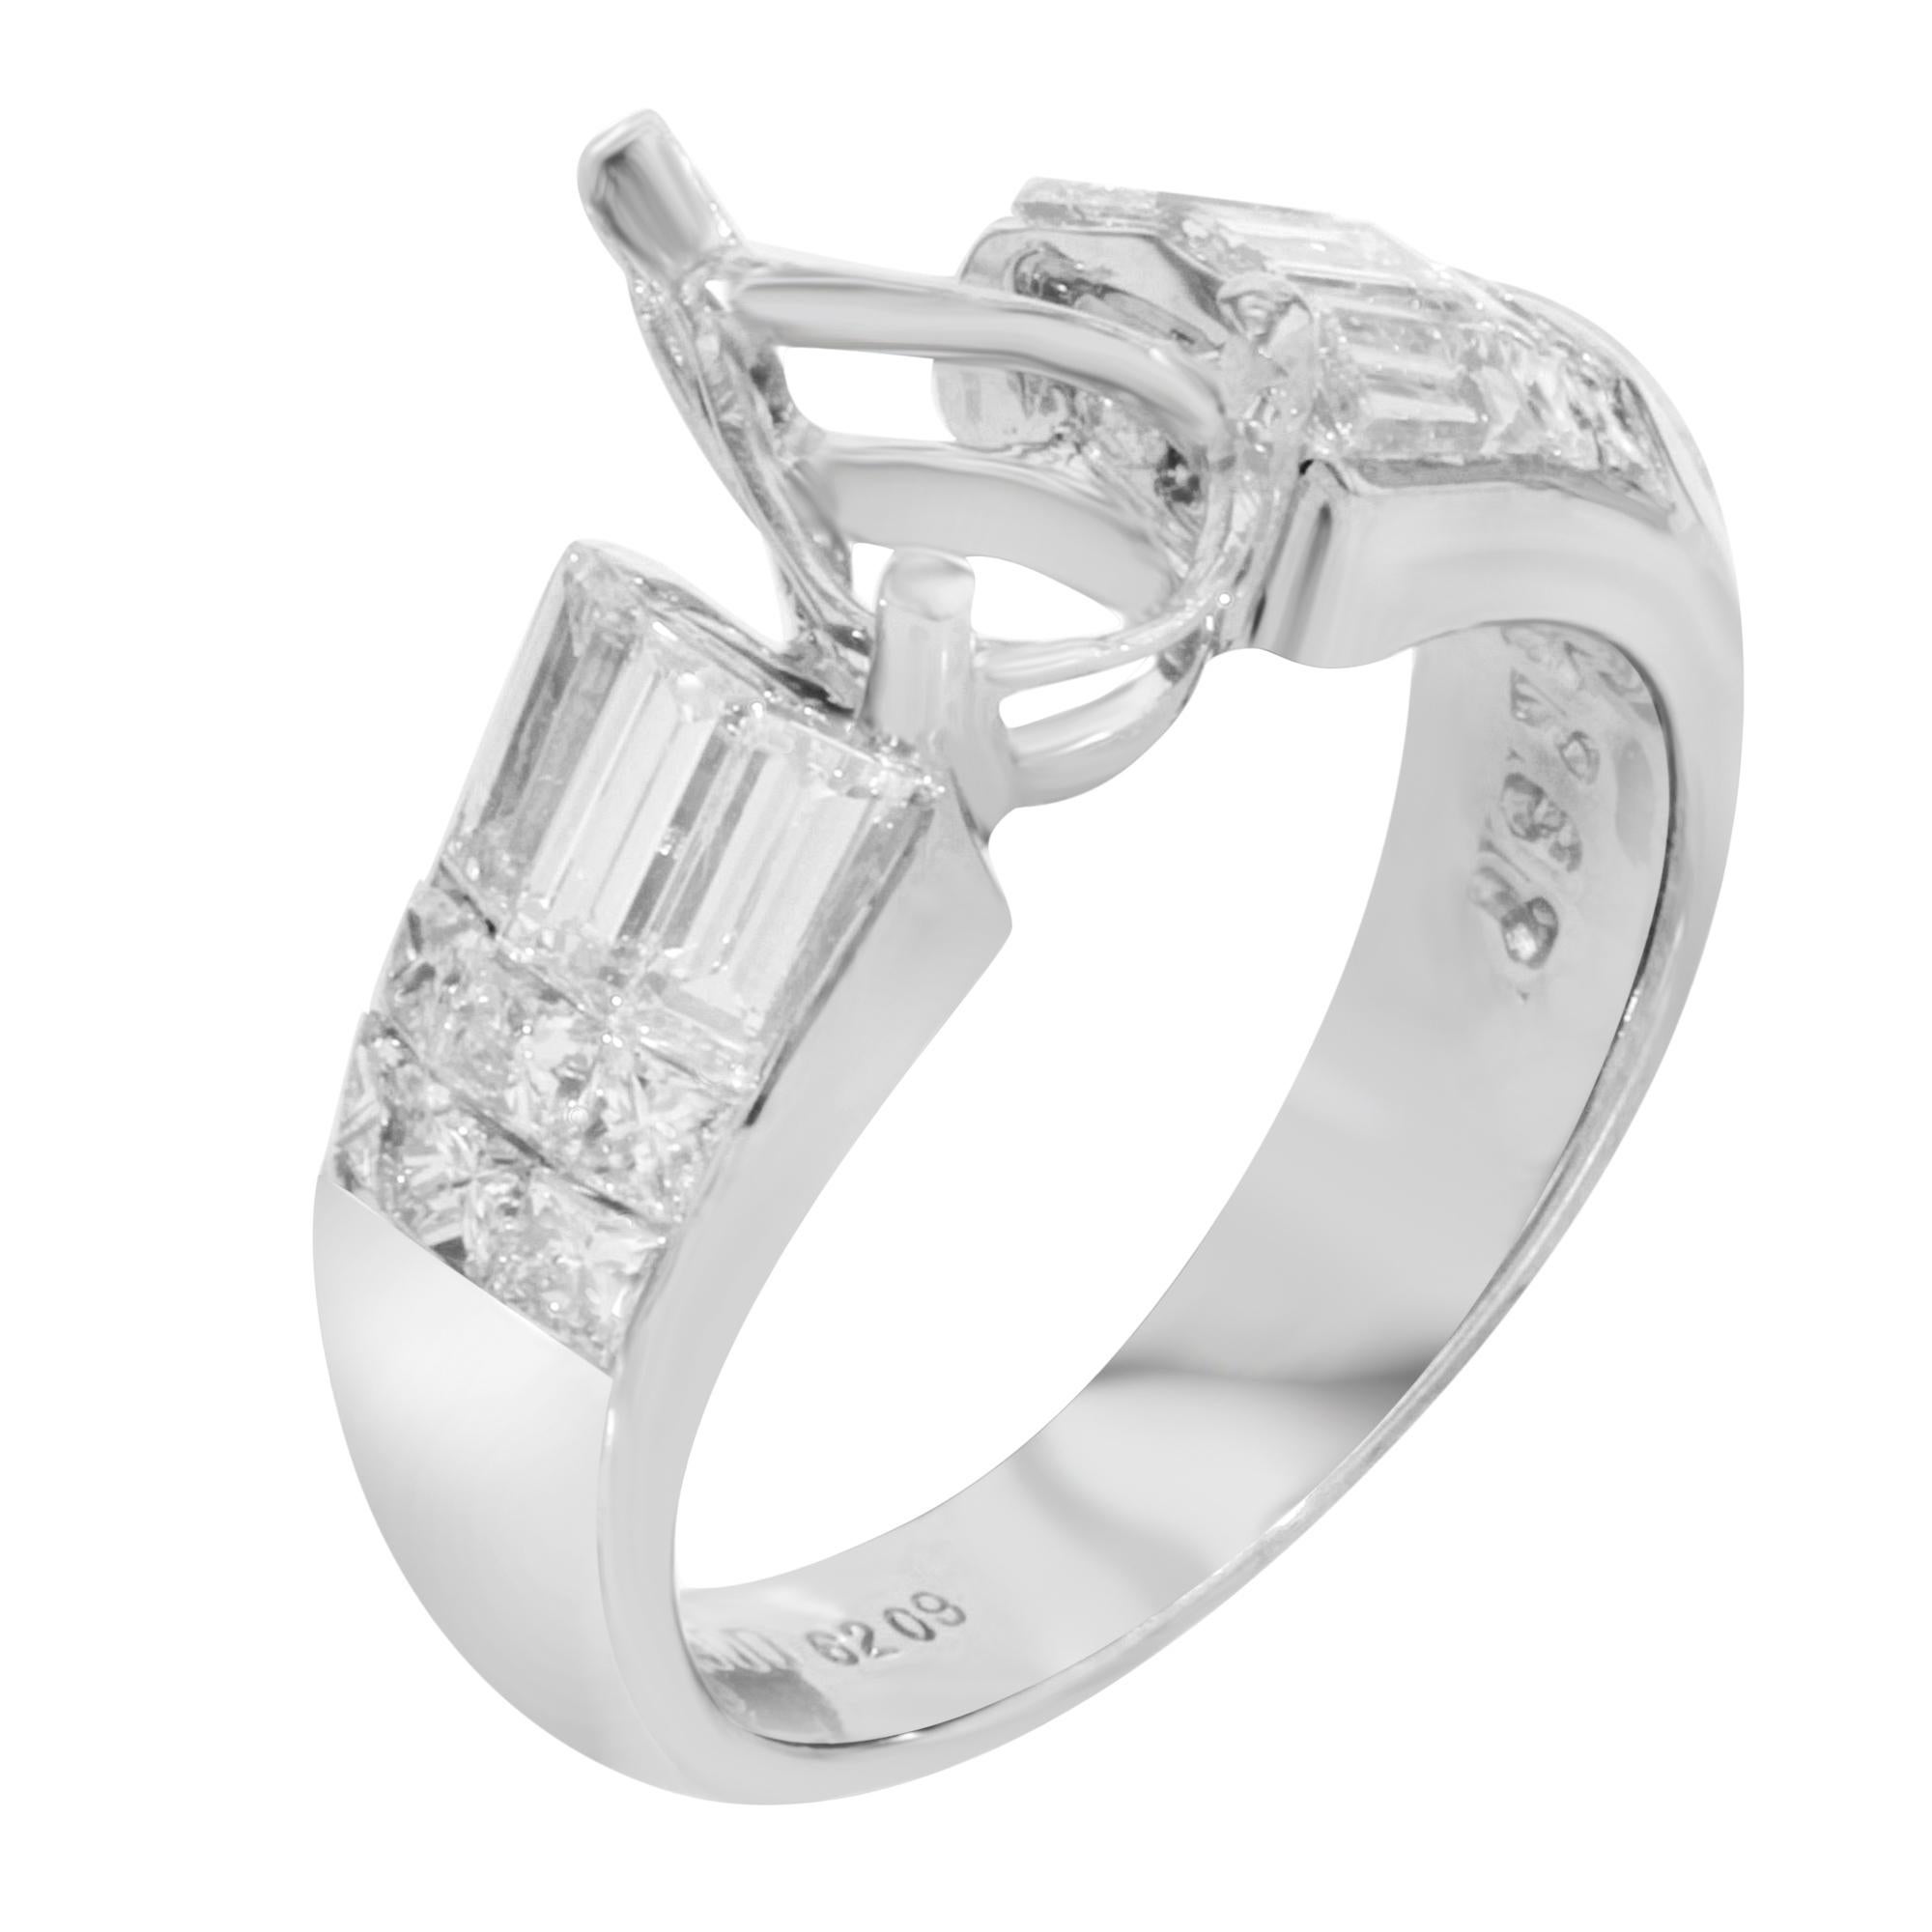 This beautiful engagement ring casting is crafted in platinum. It features 18 baguette cut and princess cut channel set diamond accents weighing appx. 1.25 cttw. Diamond color E and clarity VVS-VS. No center stone included. Ring size 7. Ring weight: